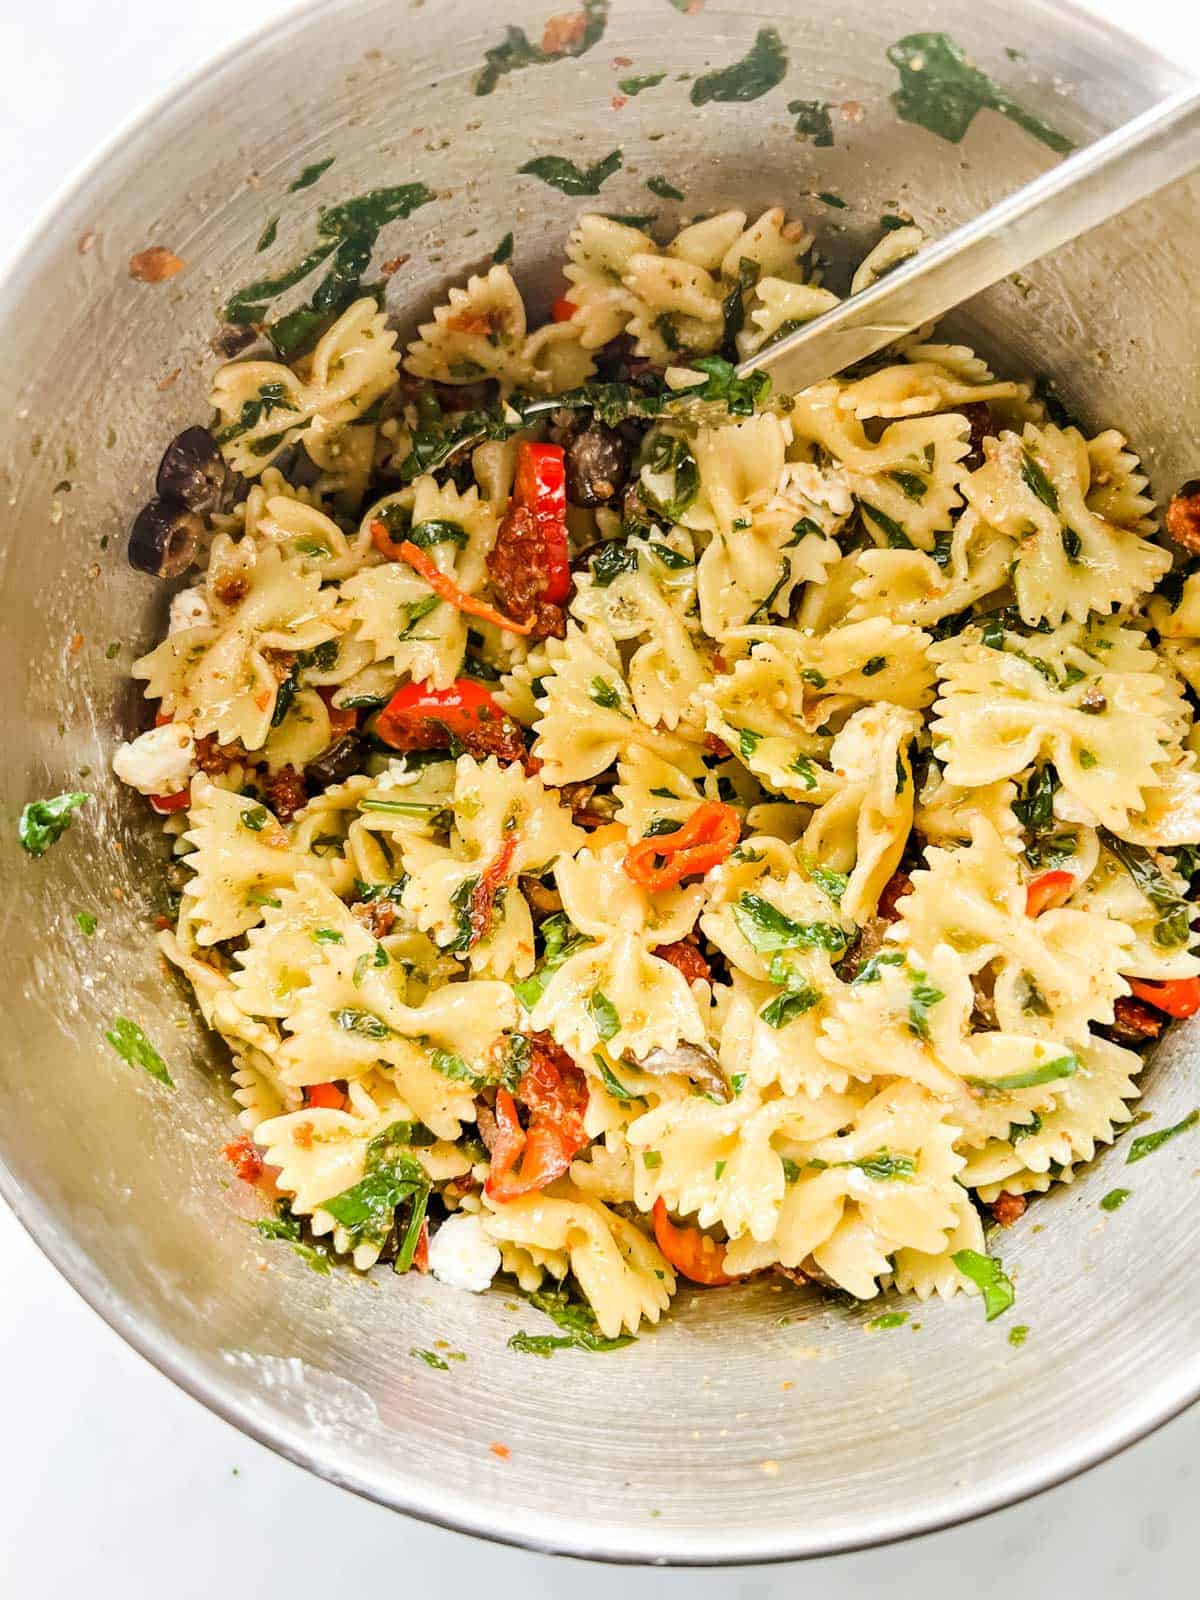 Sun dried tomato pasta salad being mixed together in a large bowl.